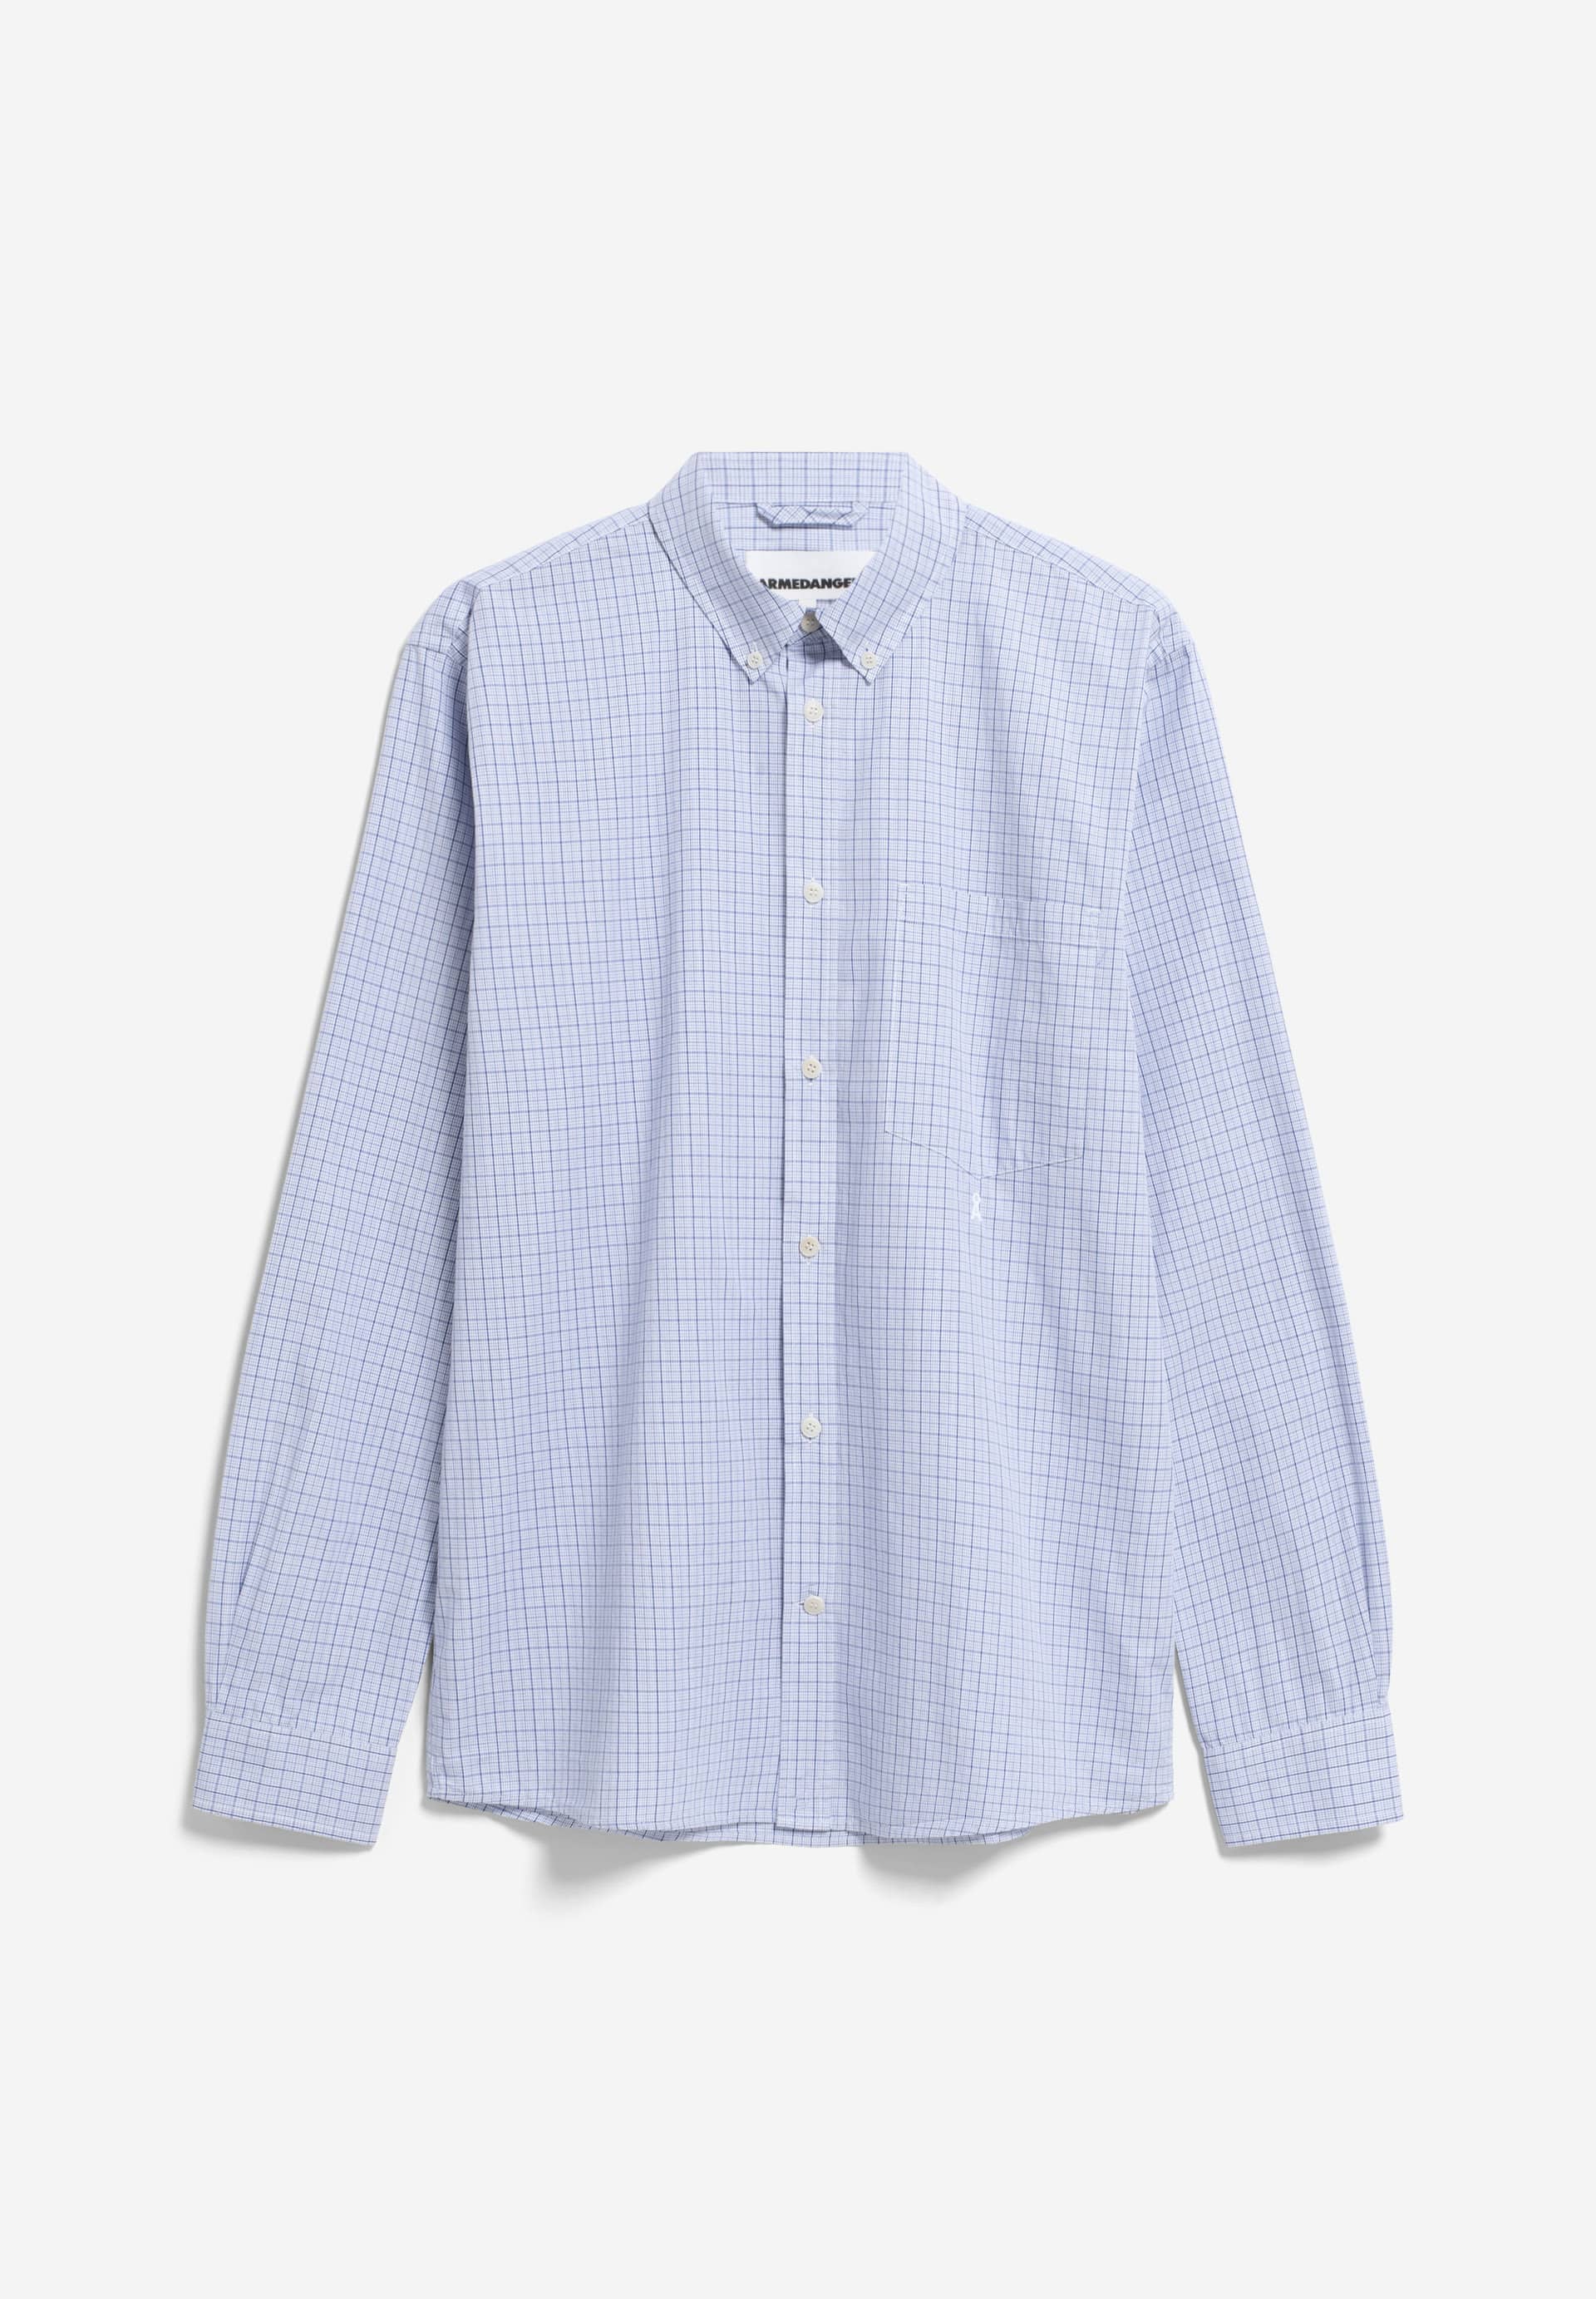 MAARCES Shirt Relaxed Fit made of Organic Cotton